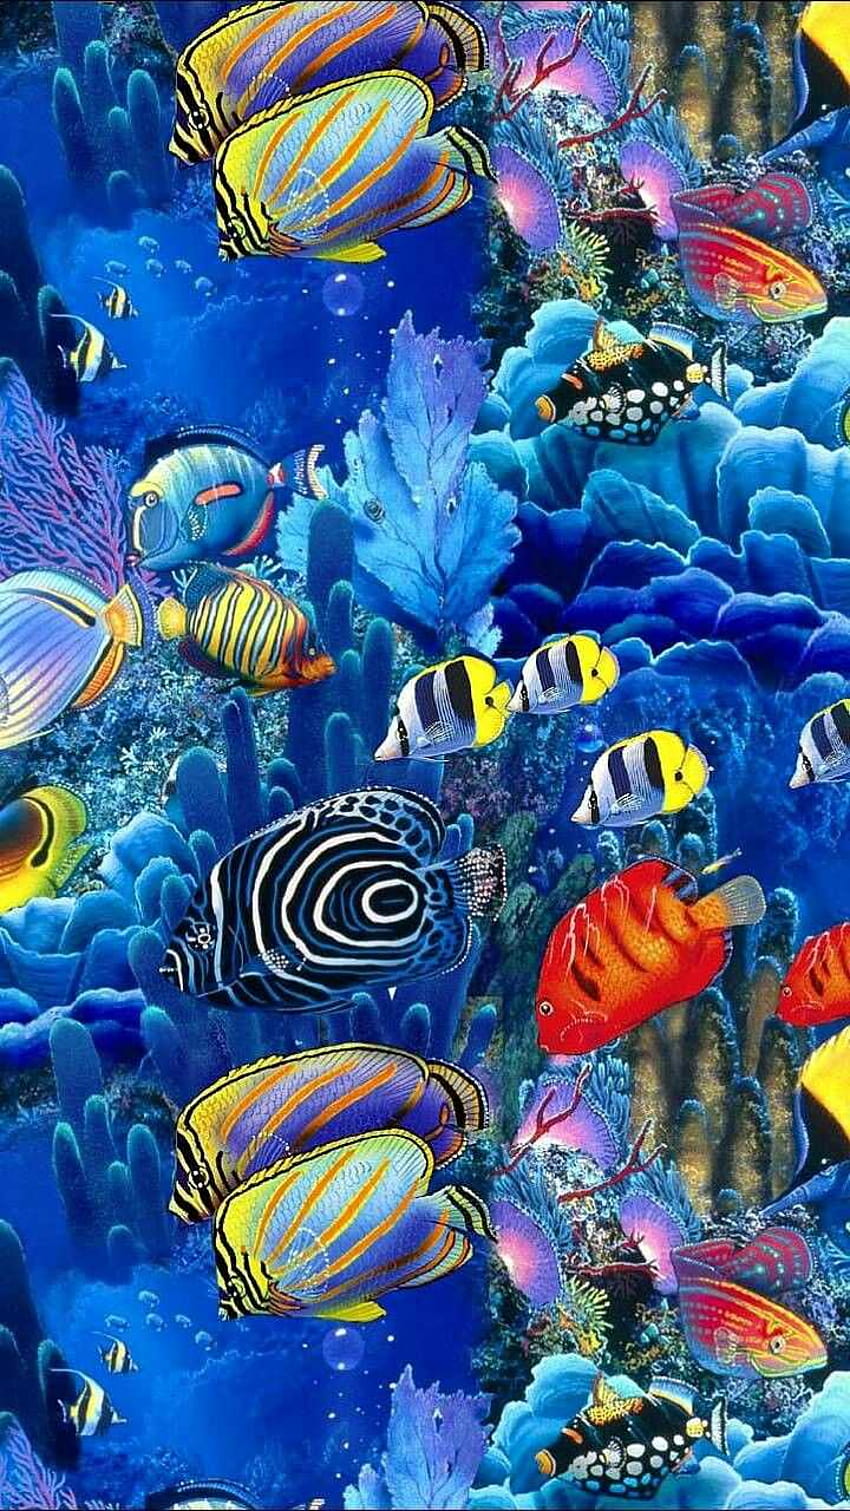 HD wallpaper Sea Underwater World Coral Exotic Tropical Fish Wallpapers  For Mobile Phone And Laptop  Wallpaper Flare